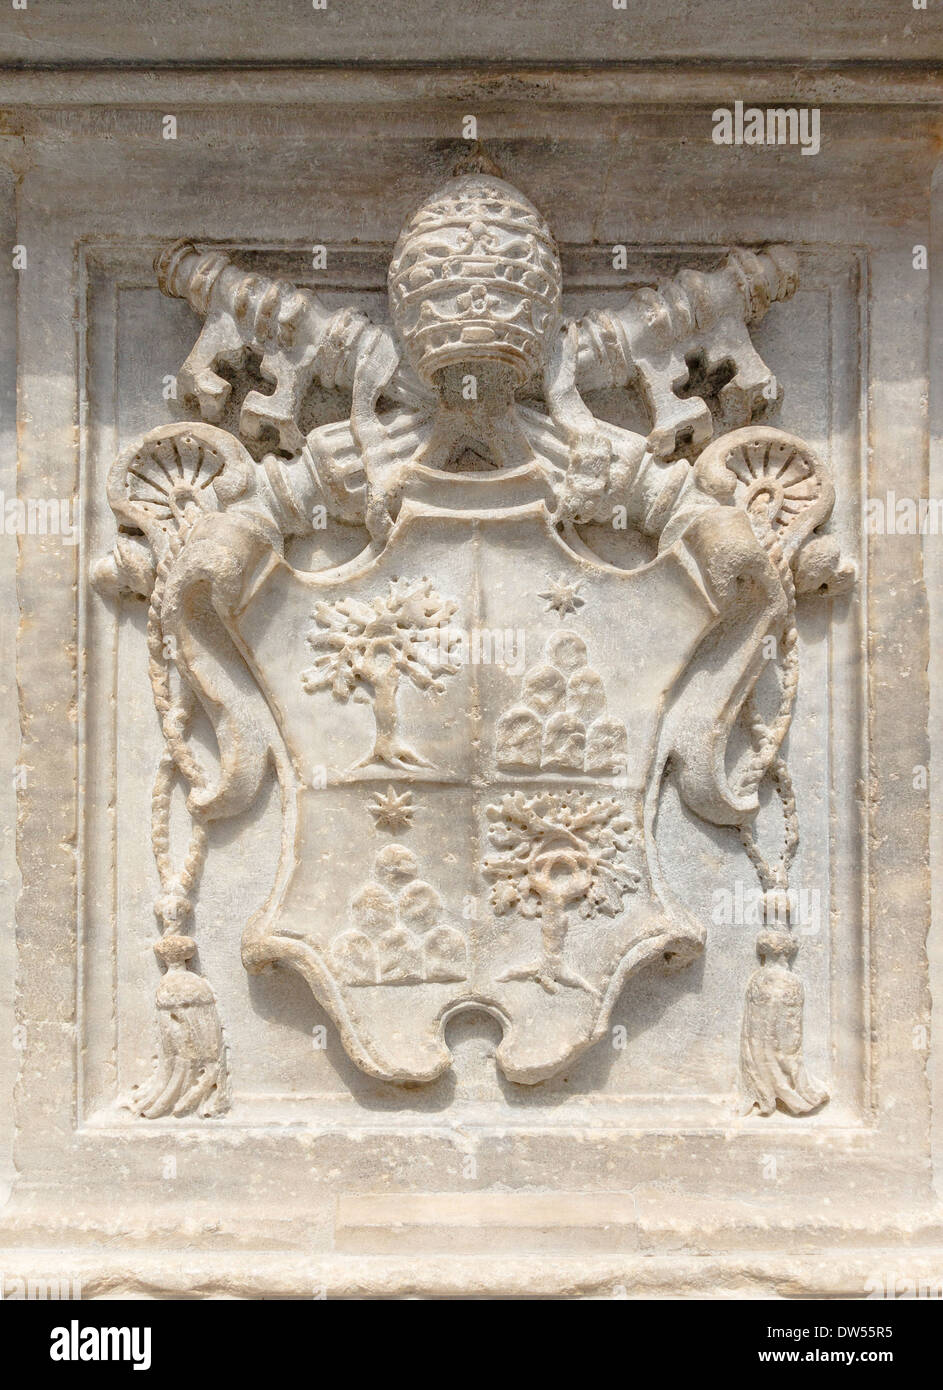 CoA of pope Alexander VII, on the pedestal of the 'Pulcino' by Bernini, Rome, Italy. Stock Photo